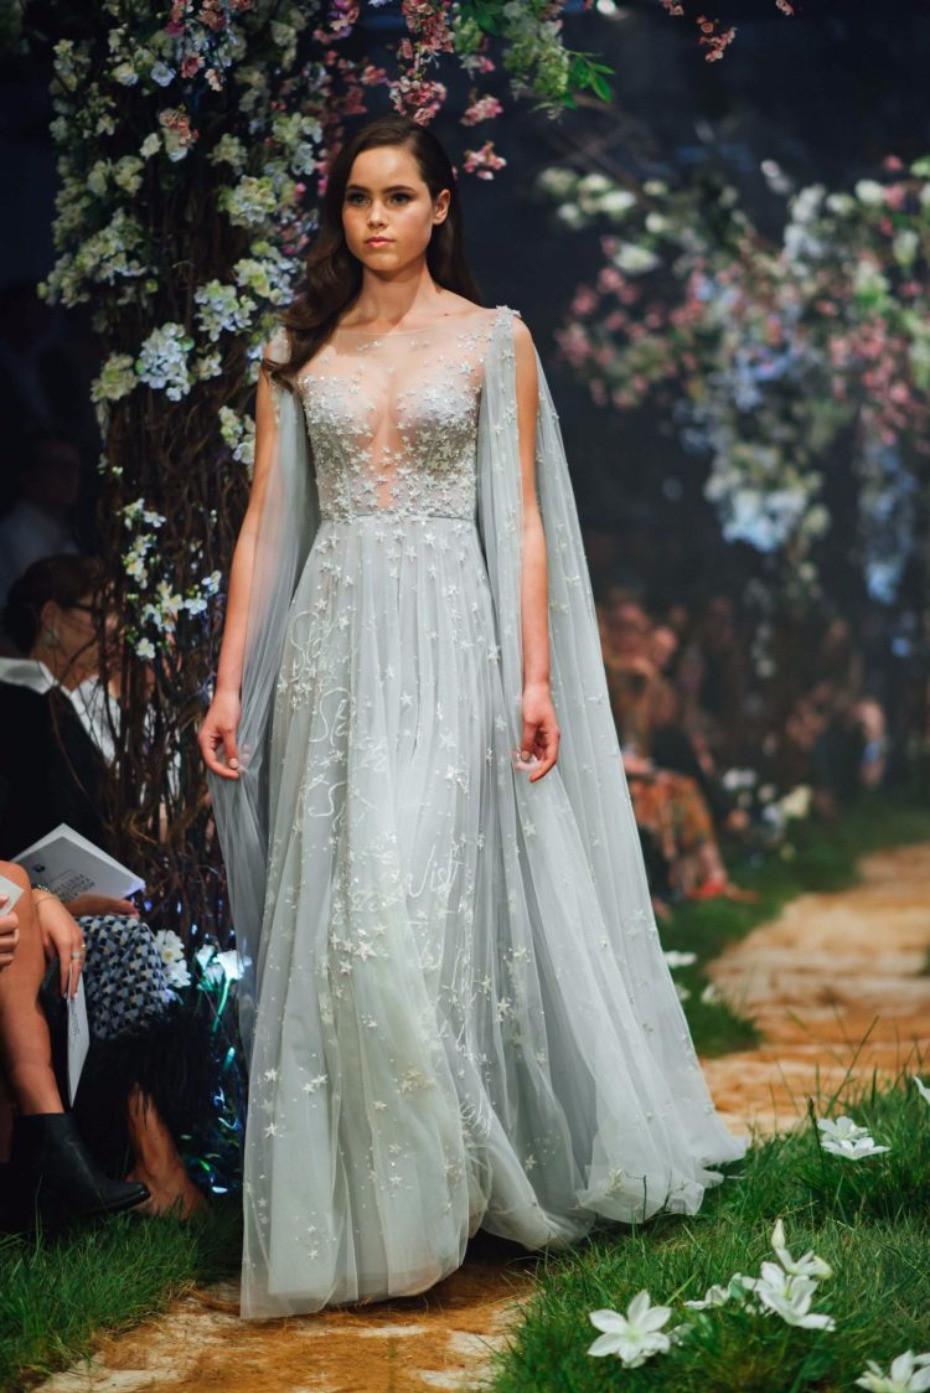 Disney Inspired Wedding Gowns
 Runway Disney Inspired Gowns from Paolo Sebastian Spring